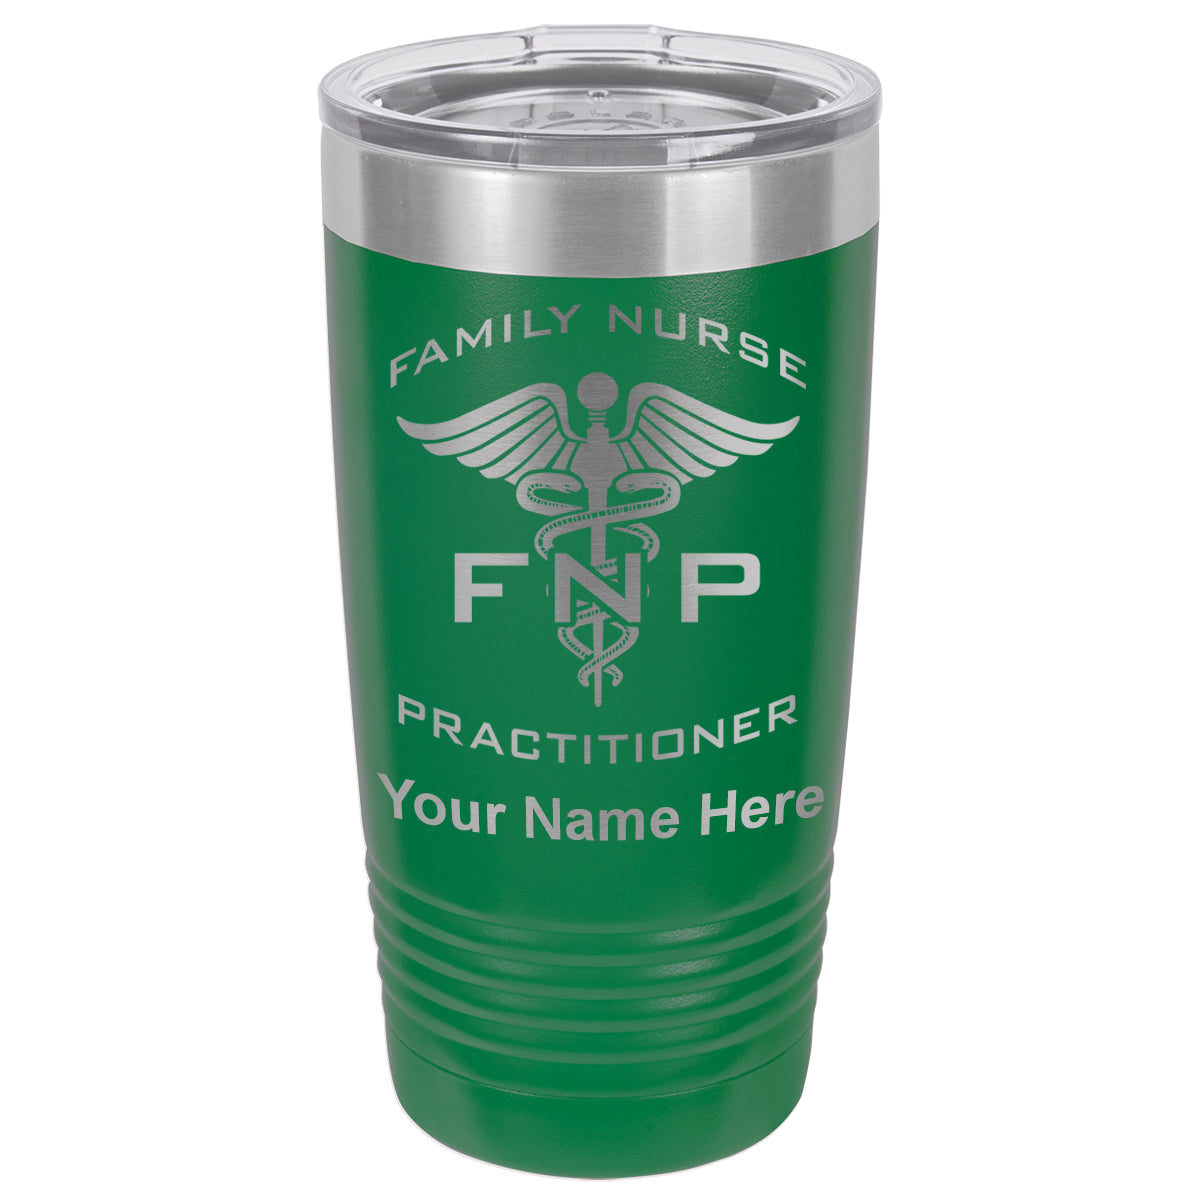 20oz Vacuum Insulated Tumbler Mug, FNP Family Nurse Practitioner, Personalized Engraving Included